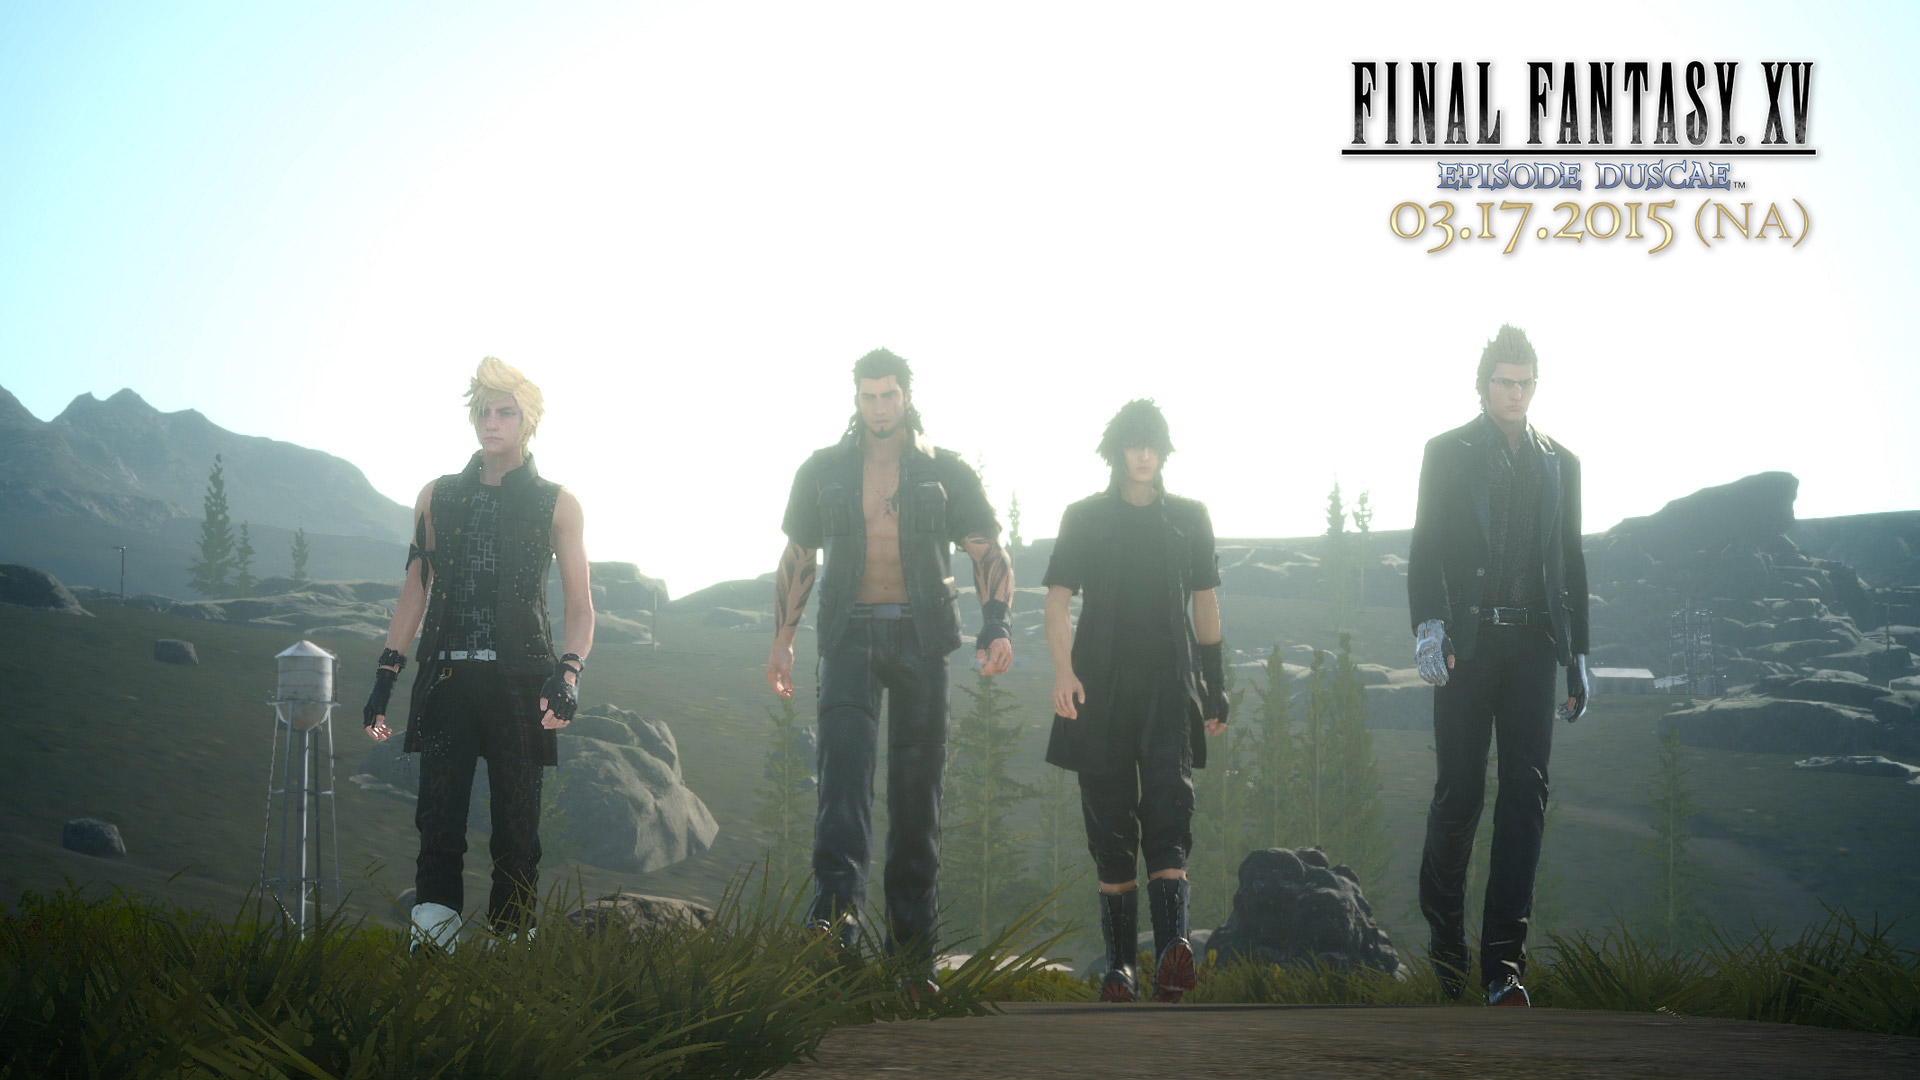 Free Download Final Fantasy Xv Wallpaper In 19x1080 19x1080 For Your Desktop Mobile Tablet Explore 46 Final Fantasy 15 Wallpapers Final Fantasy Hd Wallpaper Final Fantasy Wallpapers 19x1080 Final Fantasy 14 Wallpaper Hd